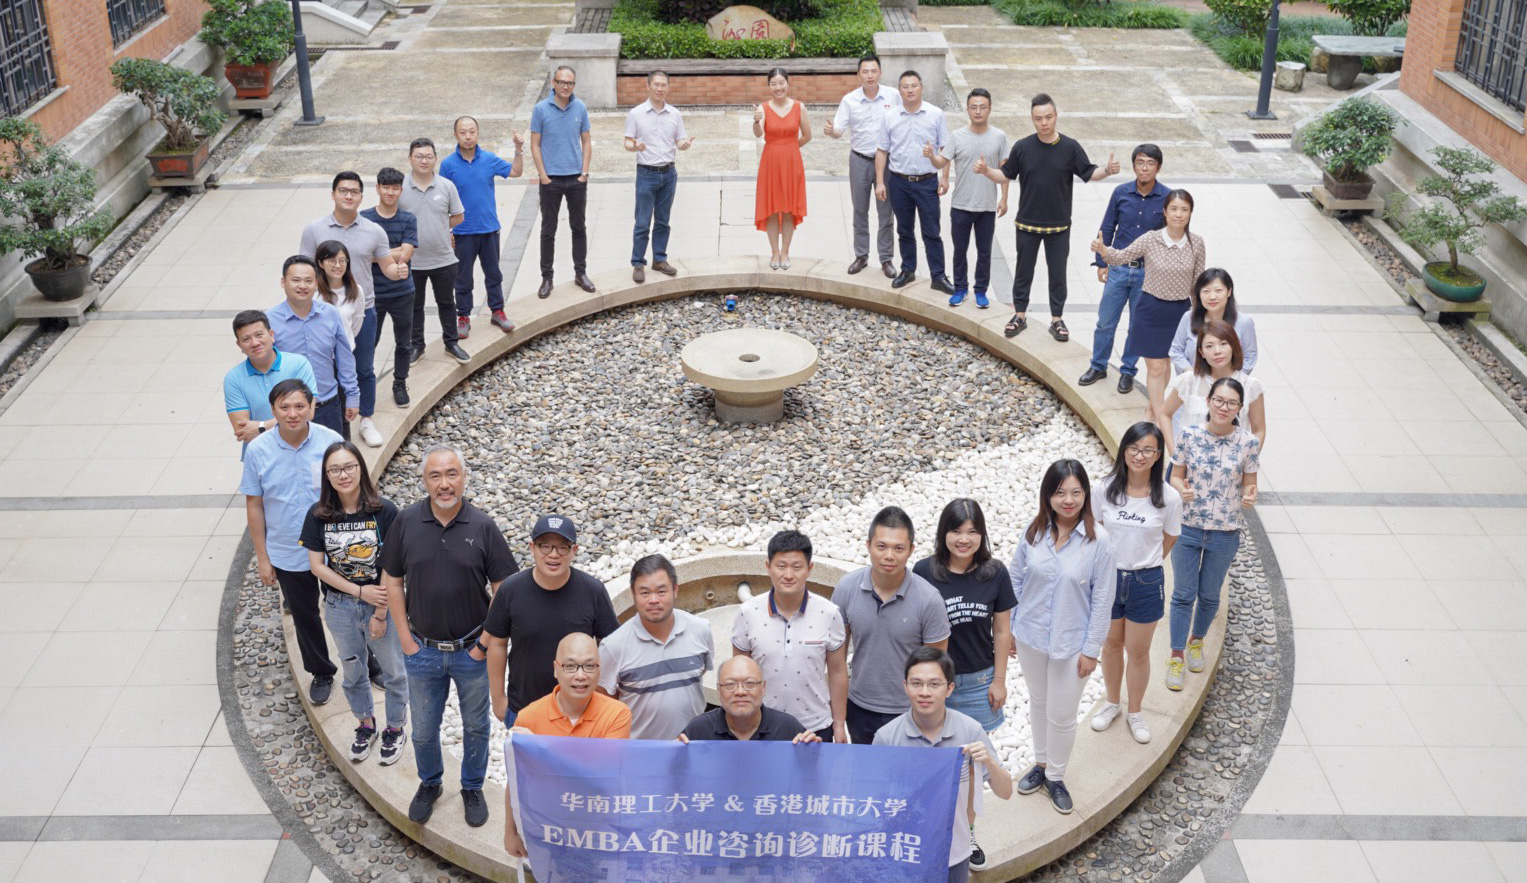 A journey of discovery with CityU EMBA